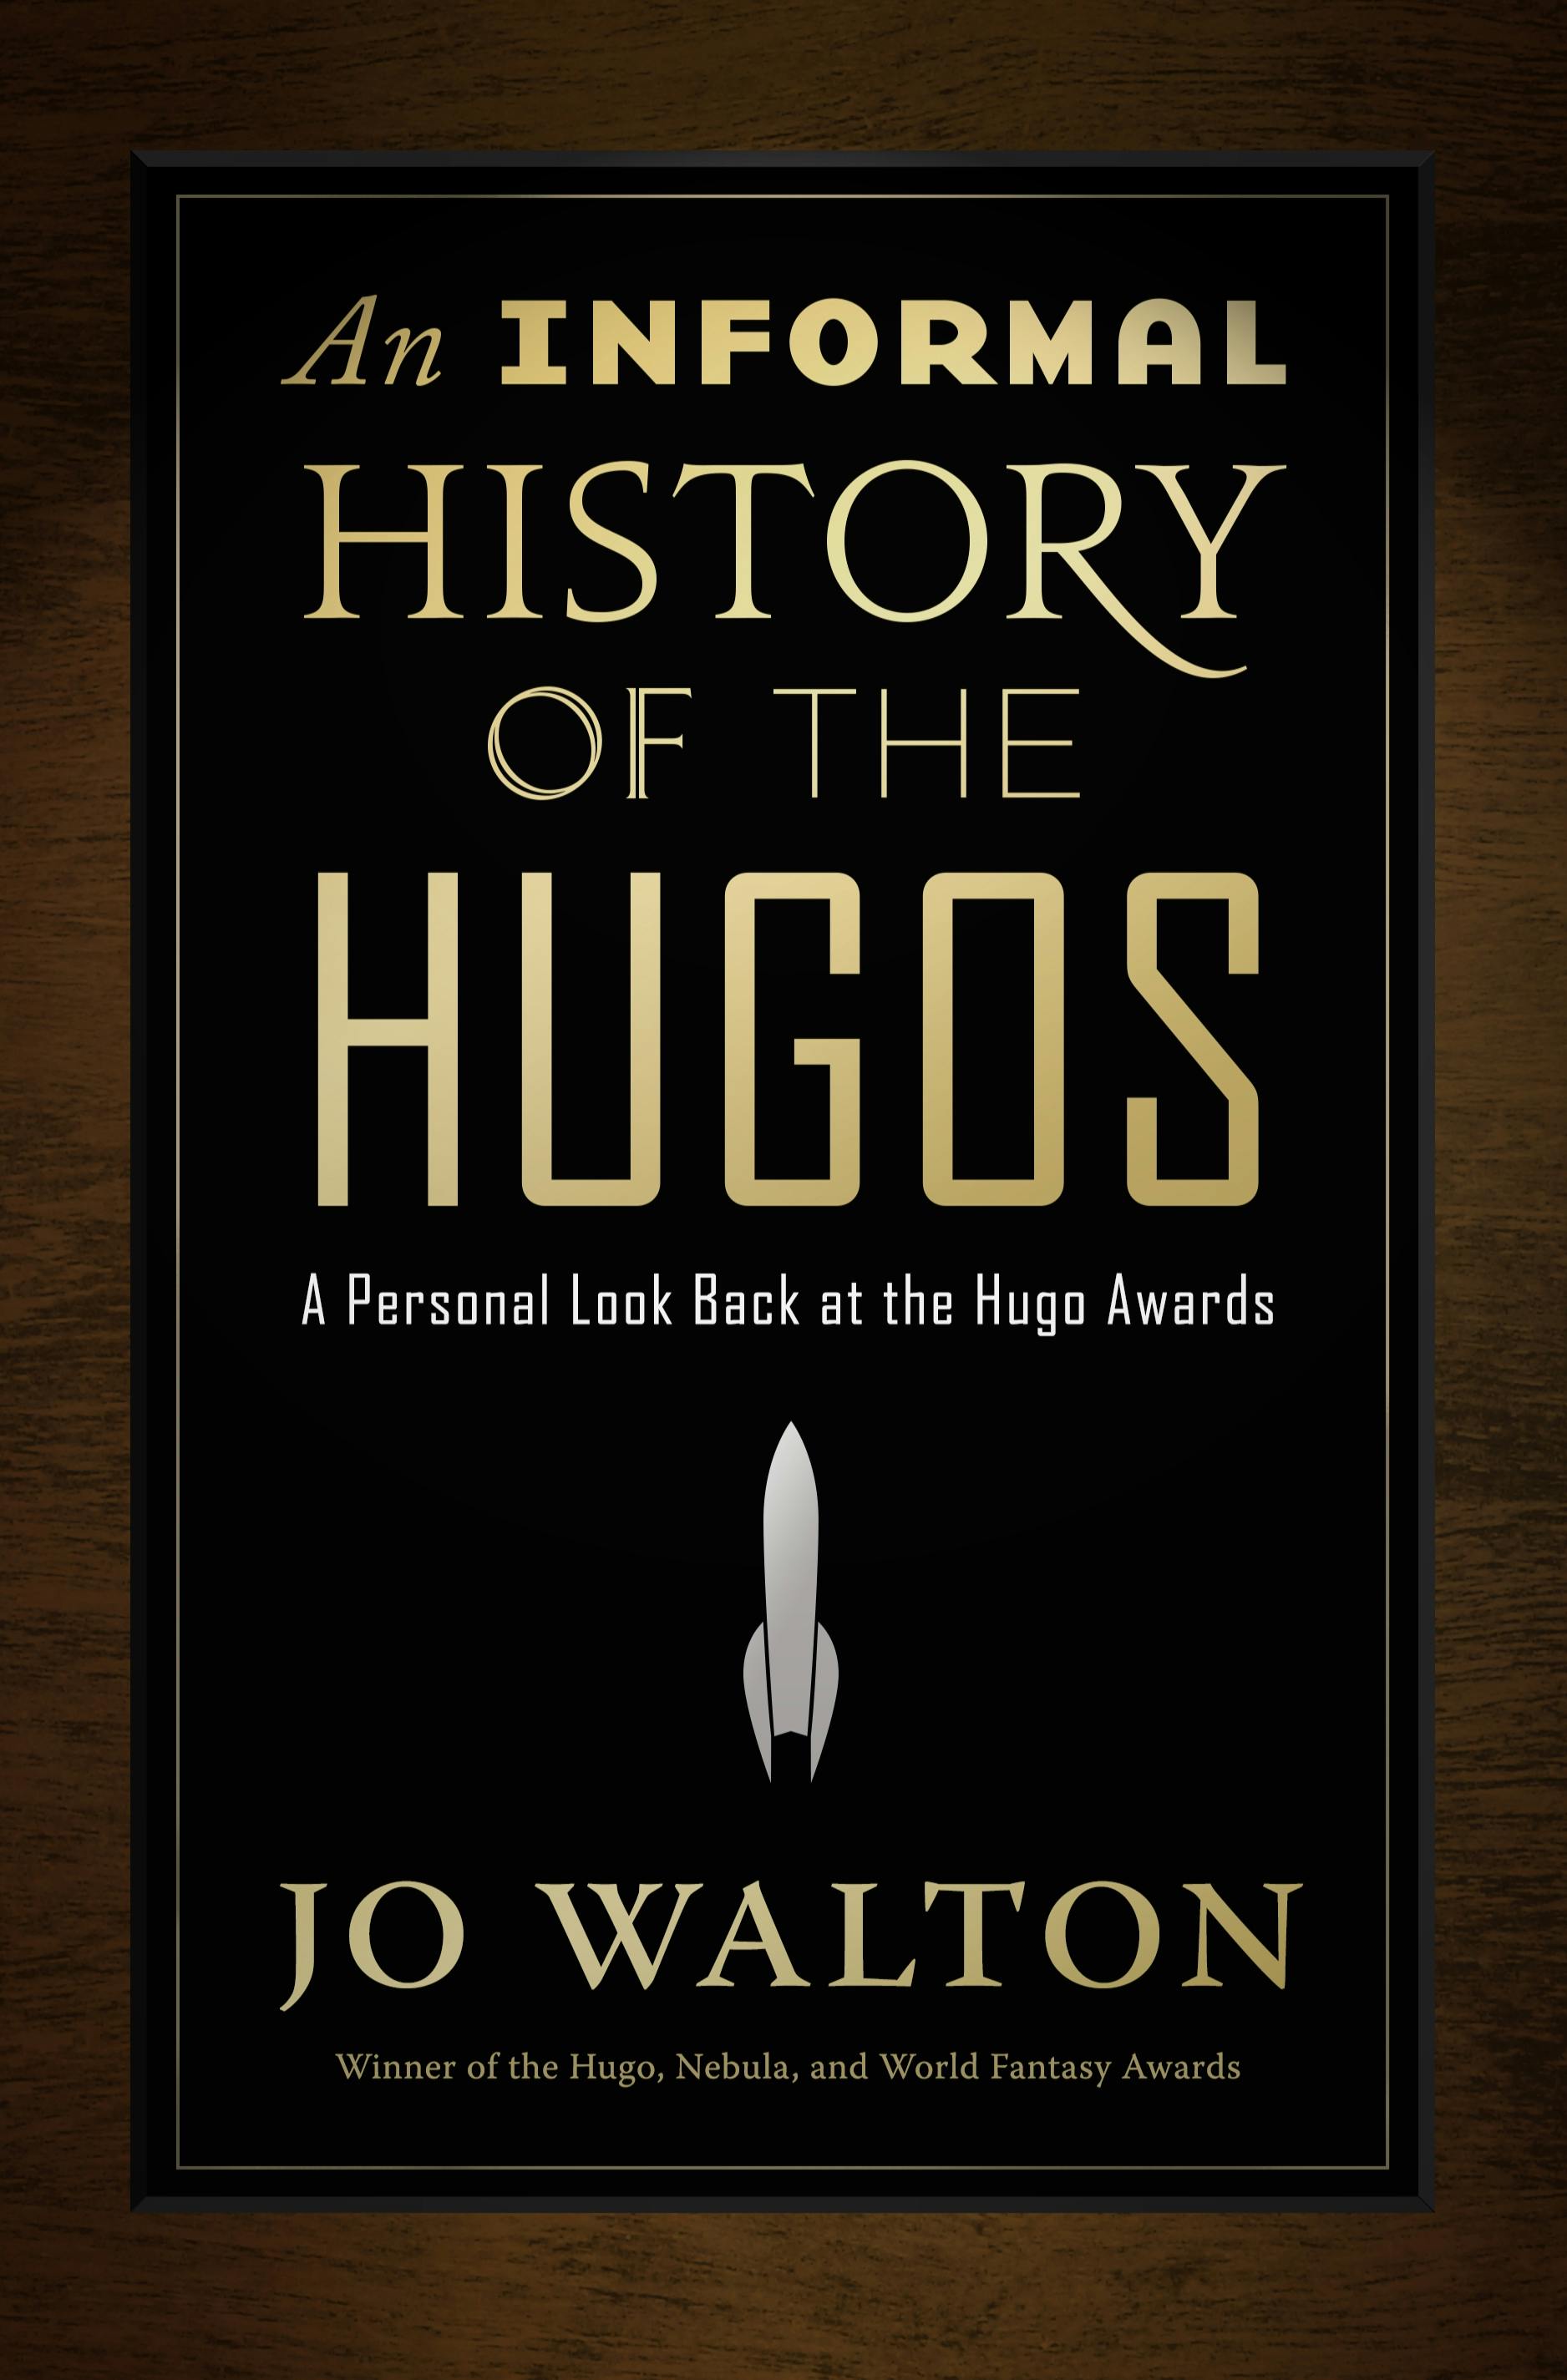 Cover for the book titled as: An Informal History of the Hugos